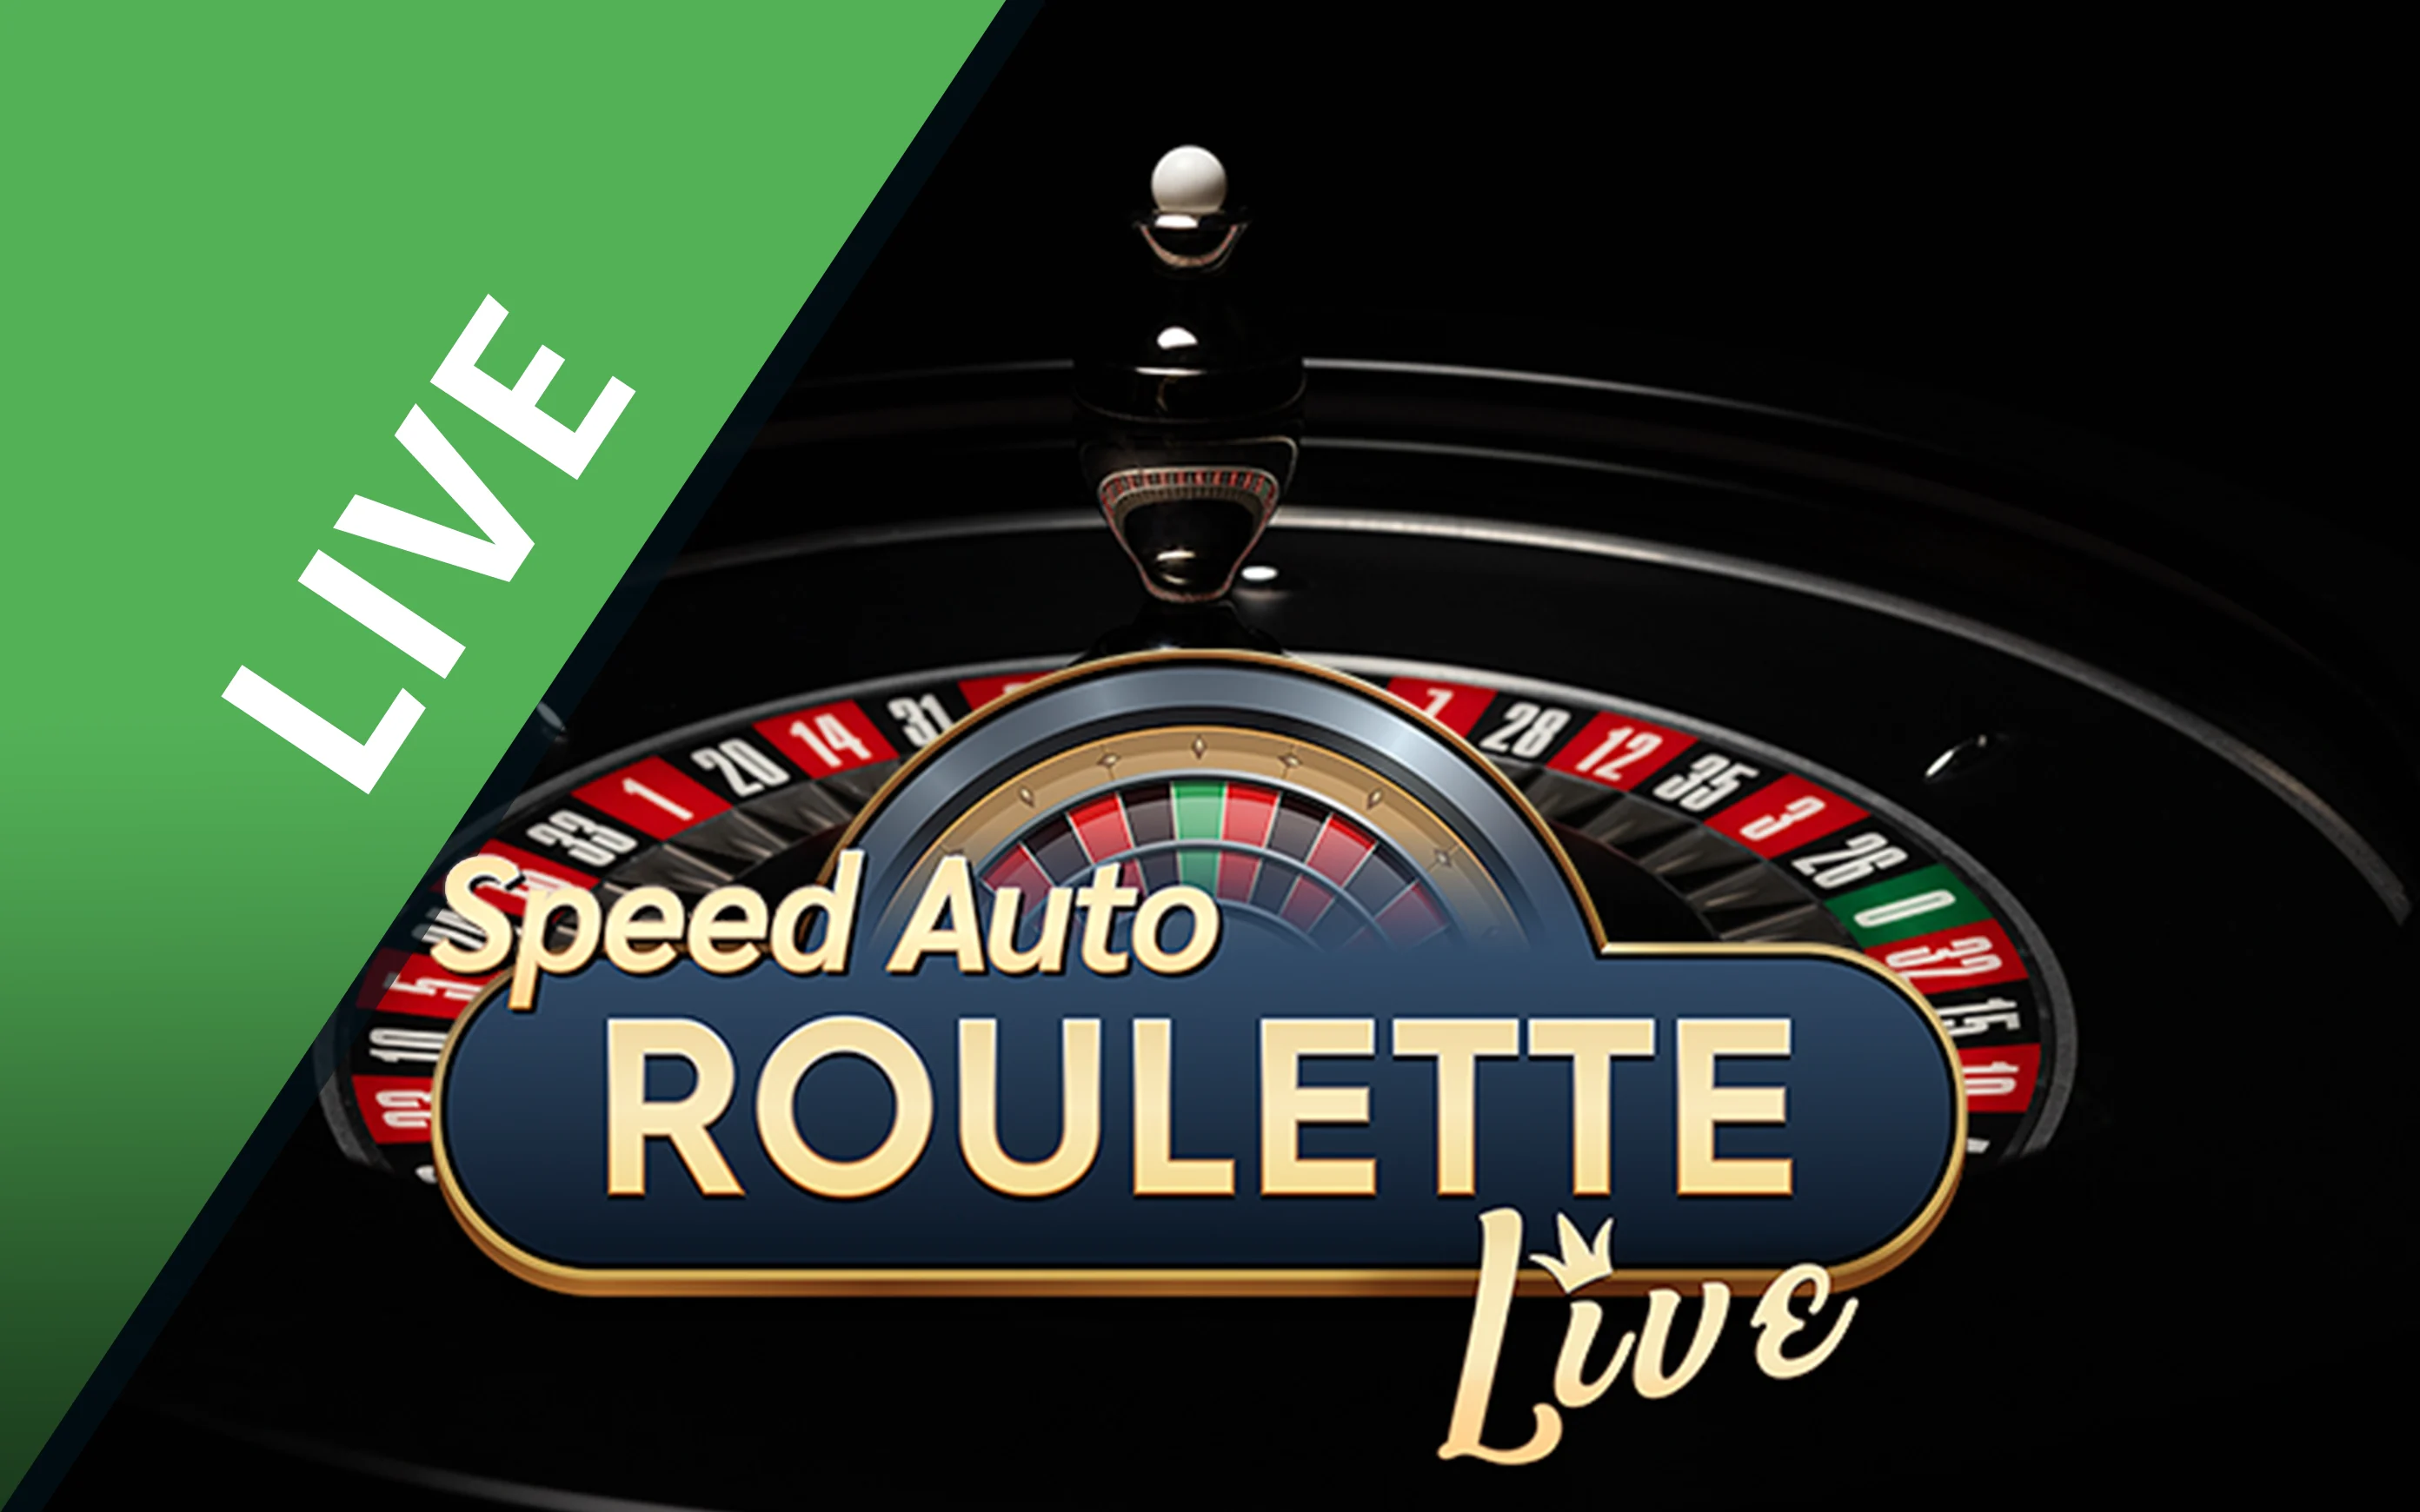 Play Speed Auto Roulette on Starcasino.be online casino